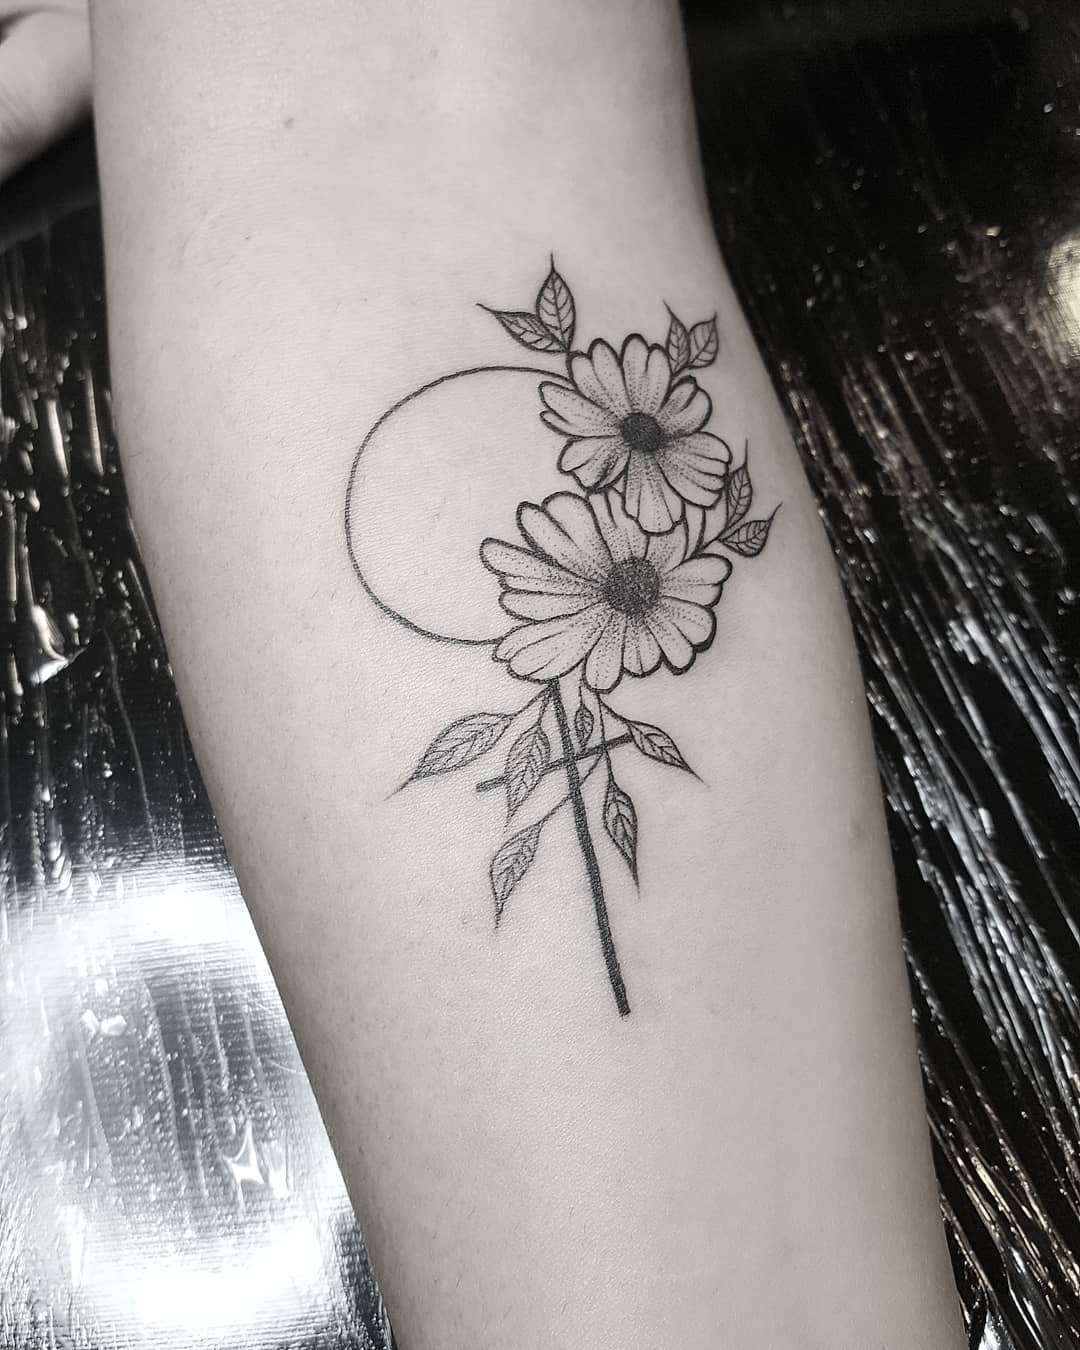 Line work floral tattoo on arm. Pic by linpimenteltattoo